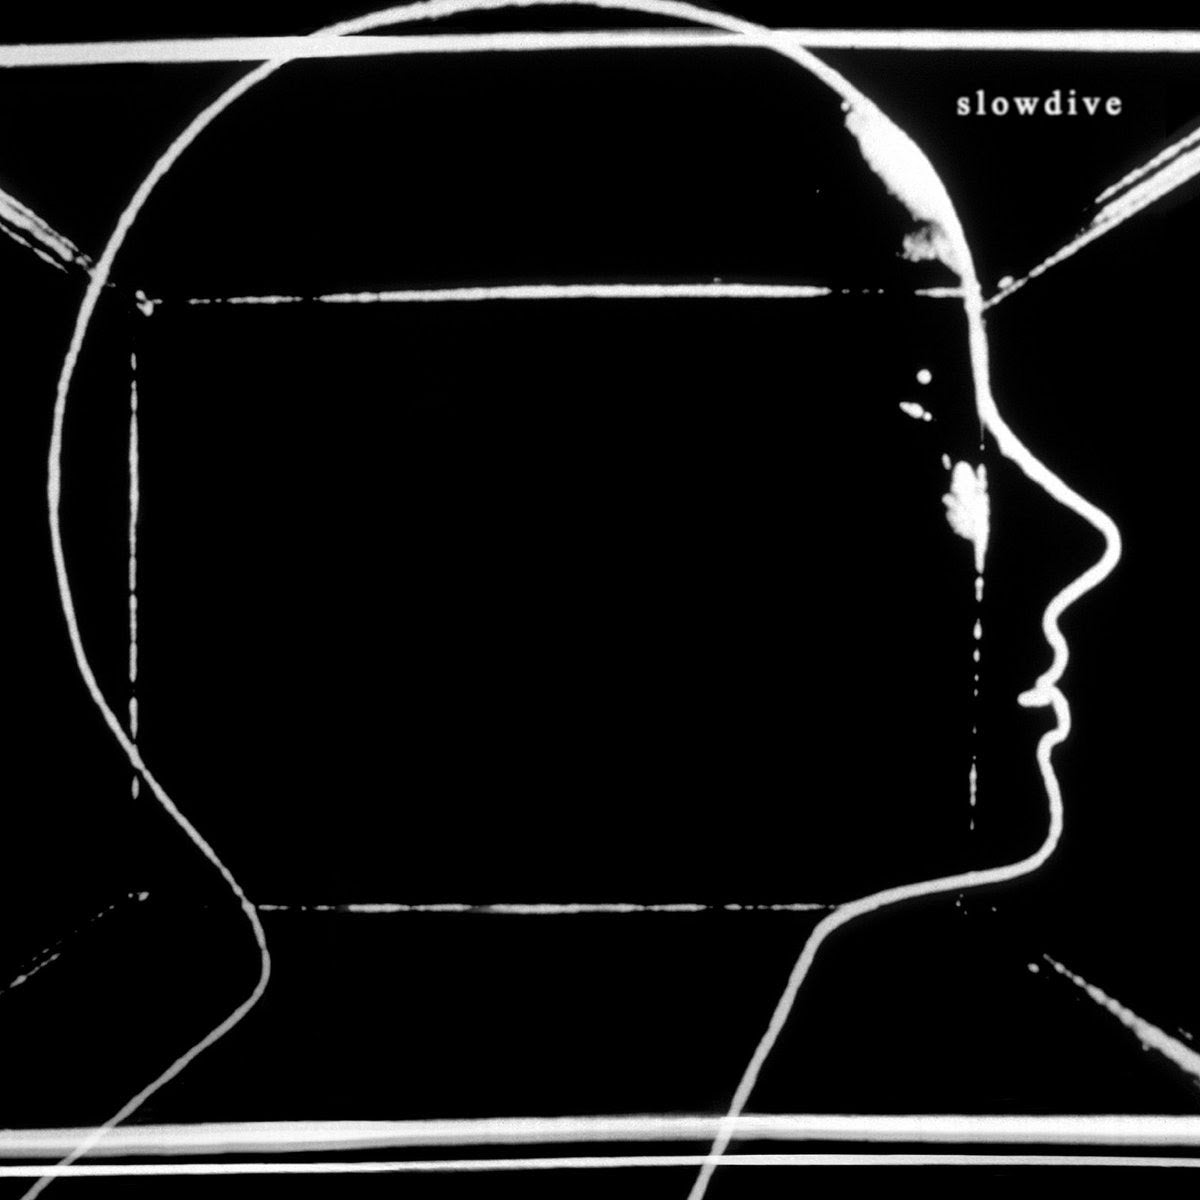 Slowdive - Slowdive | Buy the Vinyl LP from Flying Nun Records 